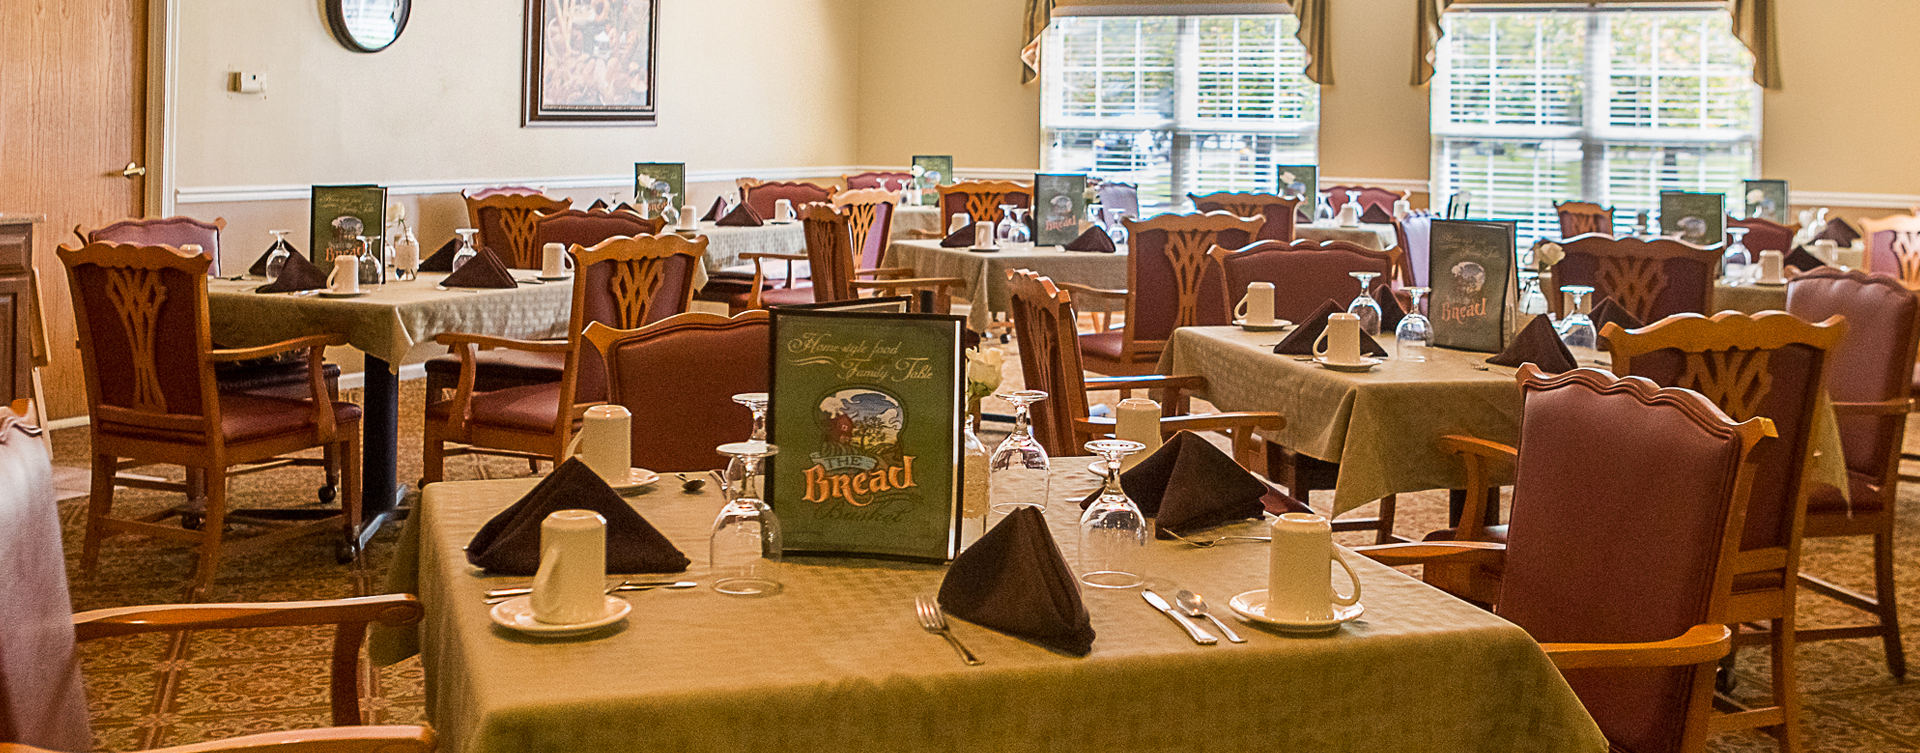 Enjoy restaurant -style meals served three times a day in our dining room at Bickford of Muscatine